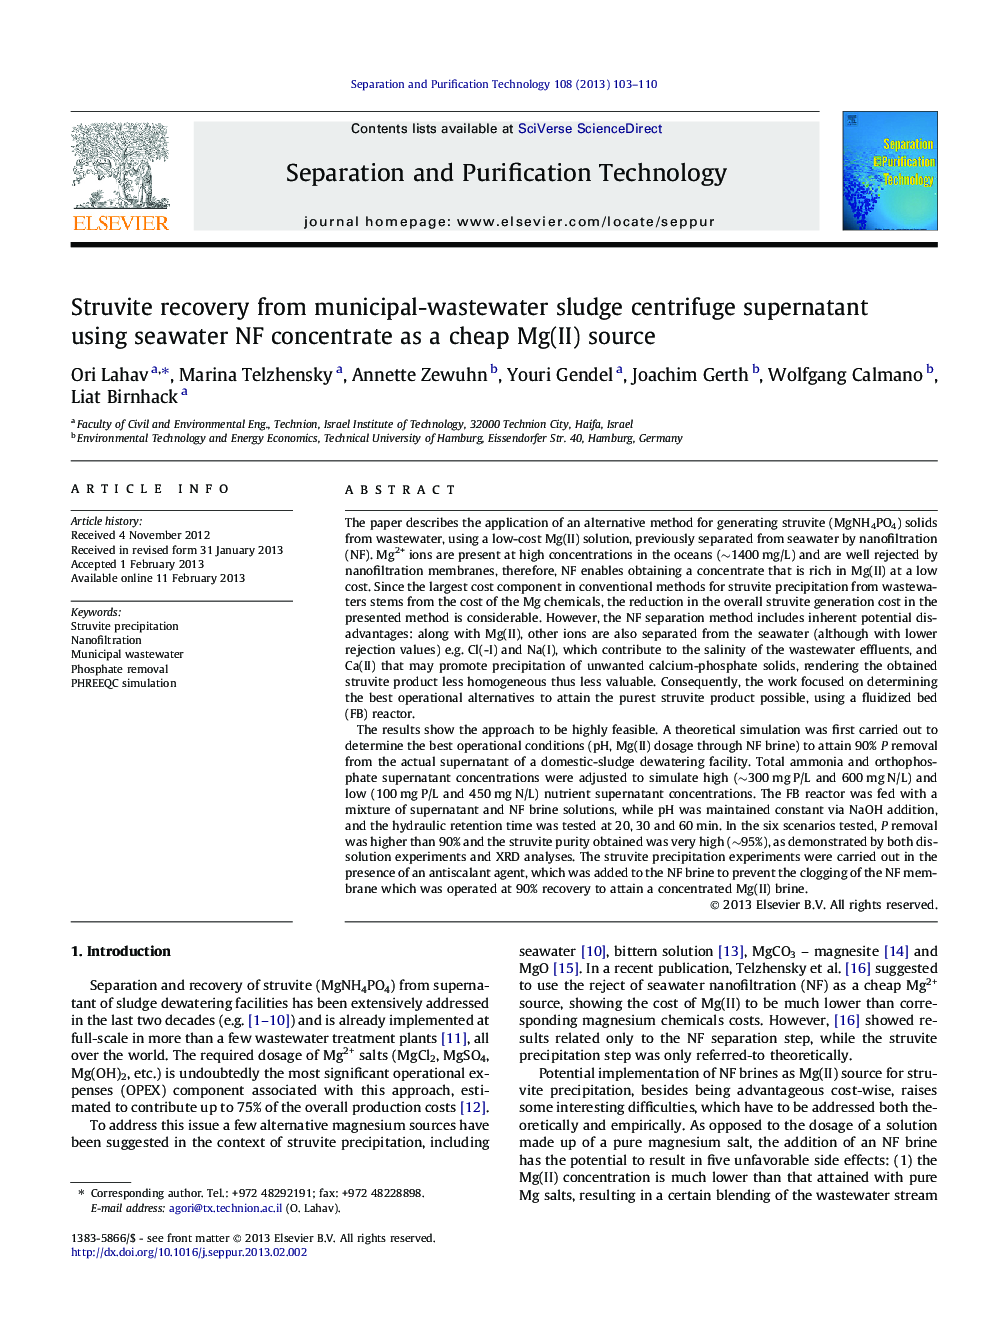 Struvite recovery from municipal-wastewater sludge centrifuge supernatant using seawater NF concentrate as a cheap Mg(II) source